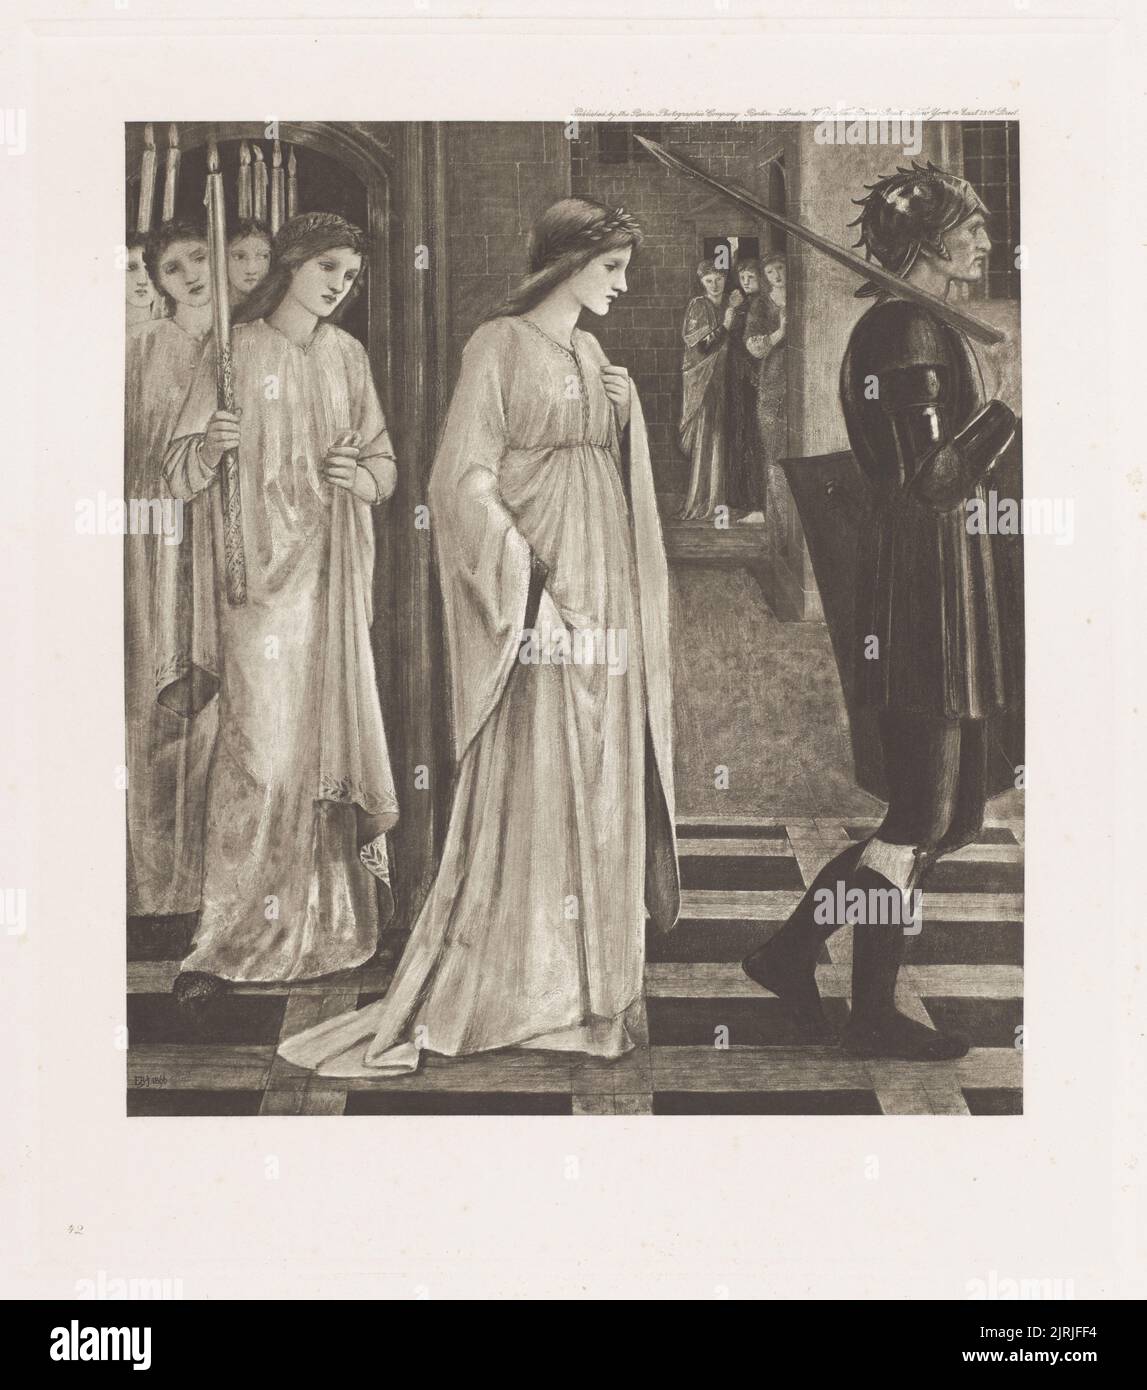 The Princess Sabra Lead to the Stake. From the portfolio: The Work of E. Burne-Jones., 1866, Great Britain, by Edward Burne-Jones, The Berlin Photographic Company. Stock Photo